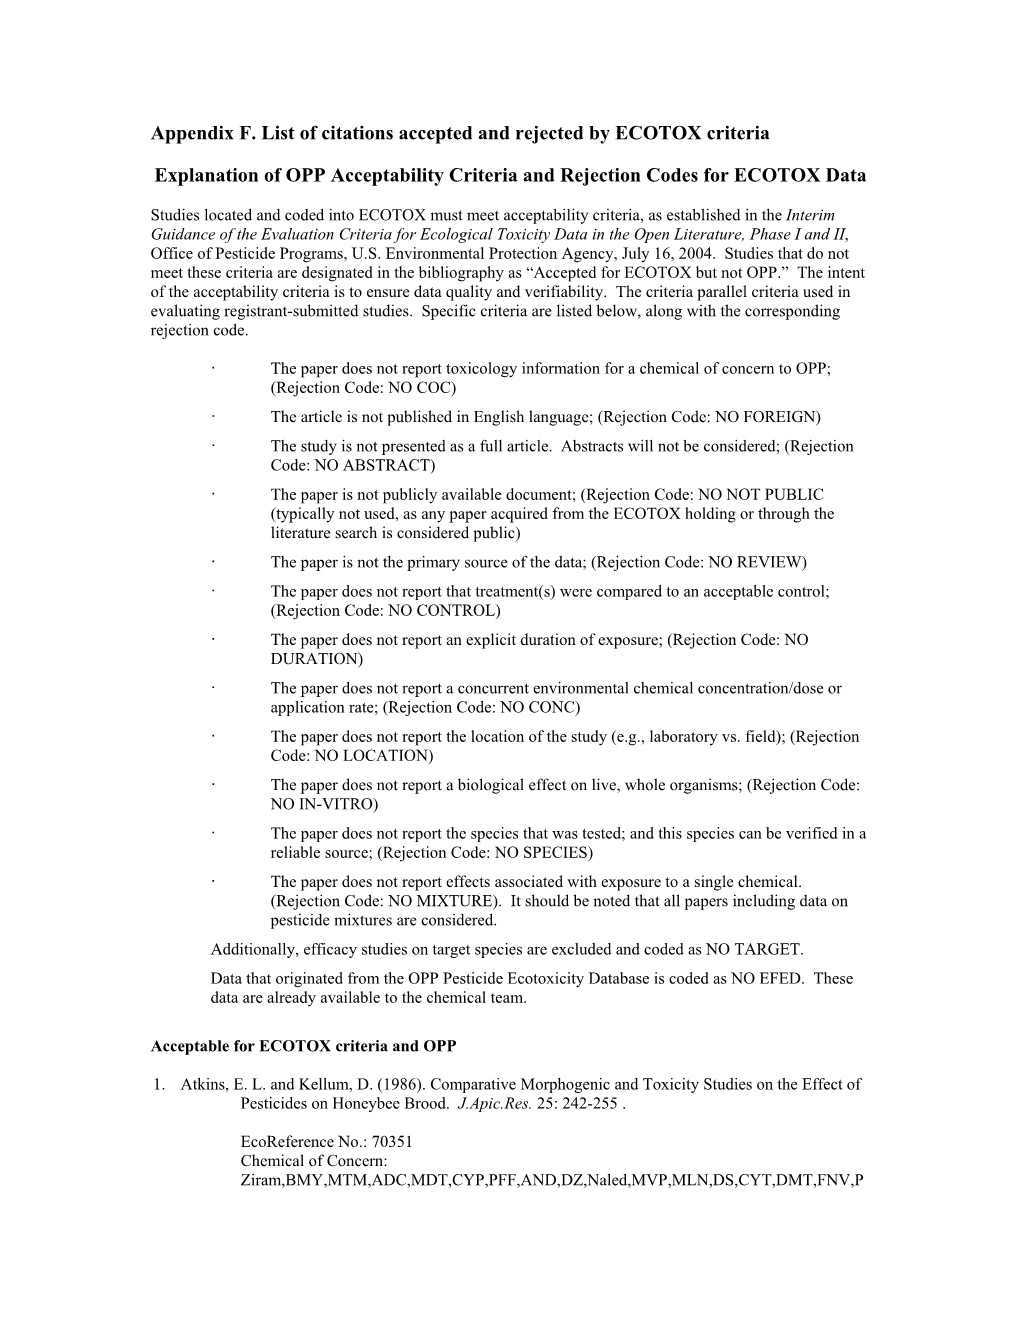 US EPA Appendix F. List of Citations Accepted and Rejected by ECOTOX